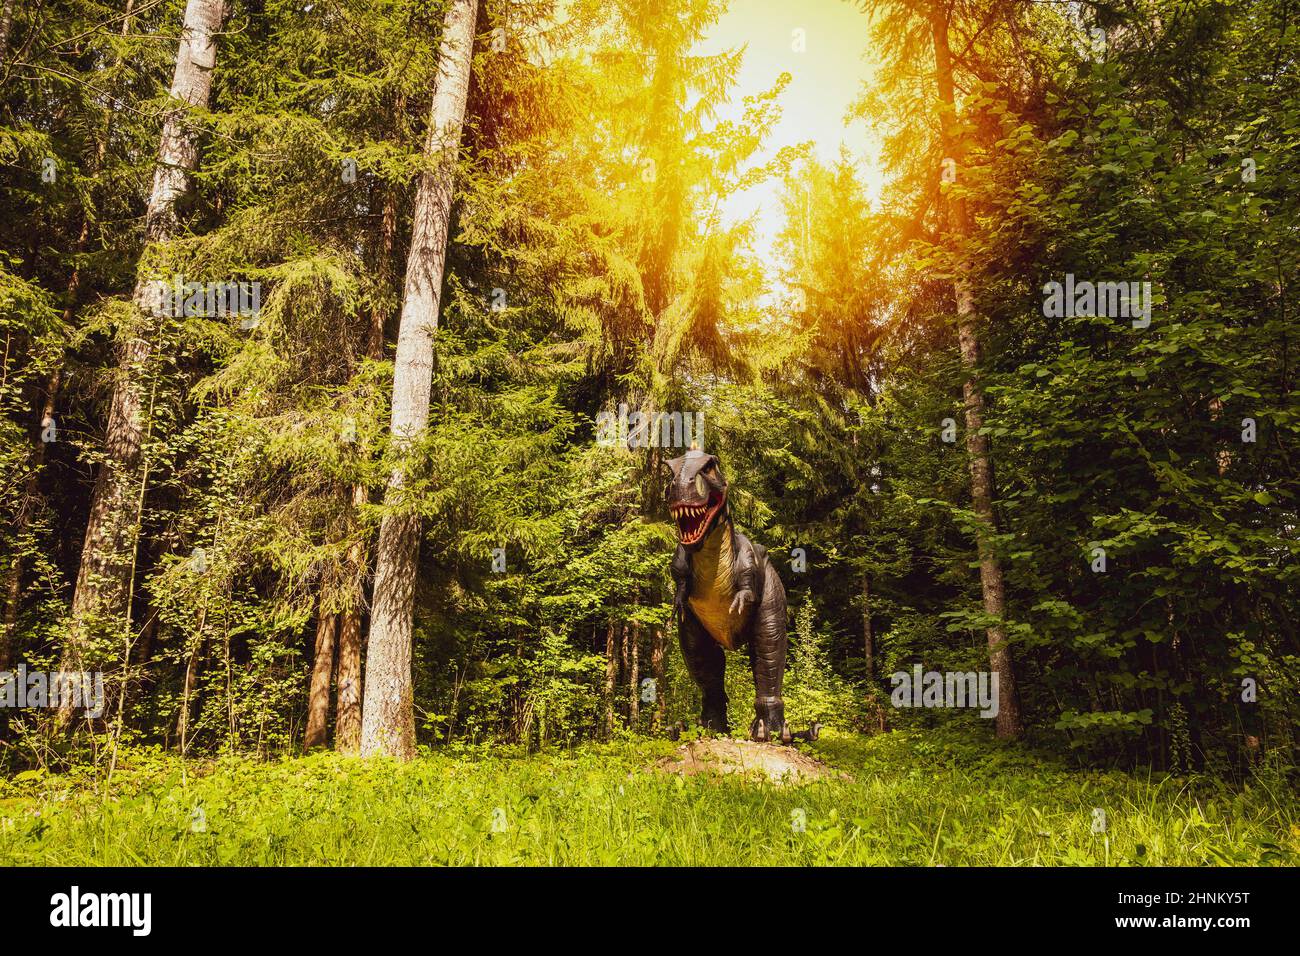 Statue of dinosaur in a forest with tall trees Stock Photo